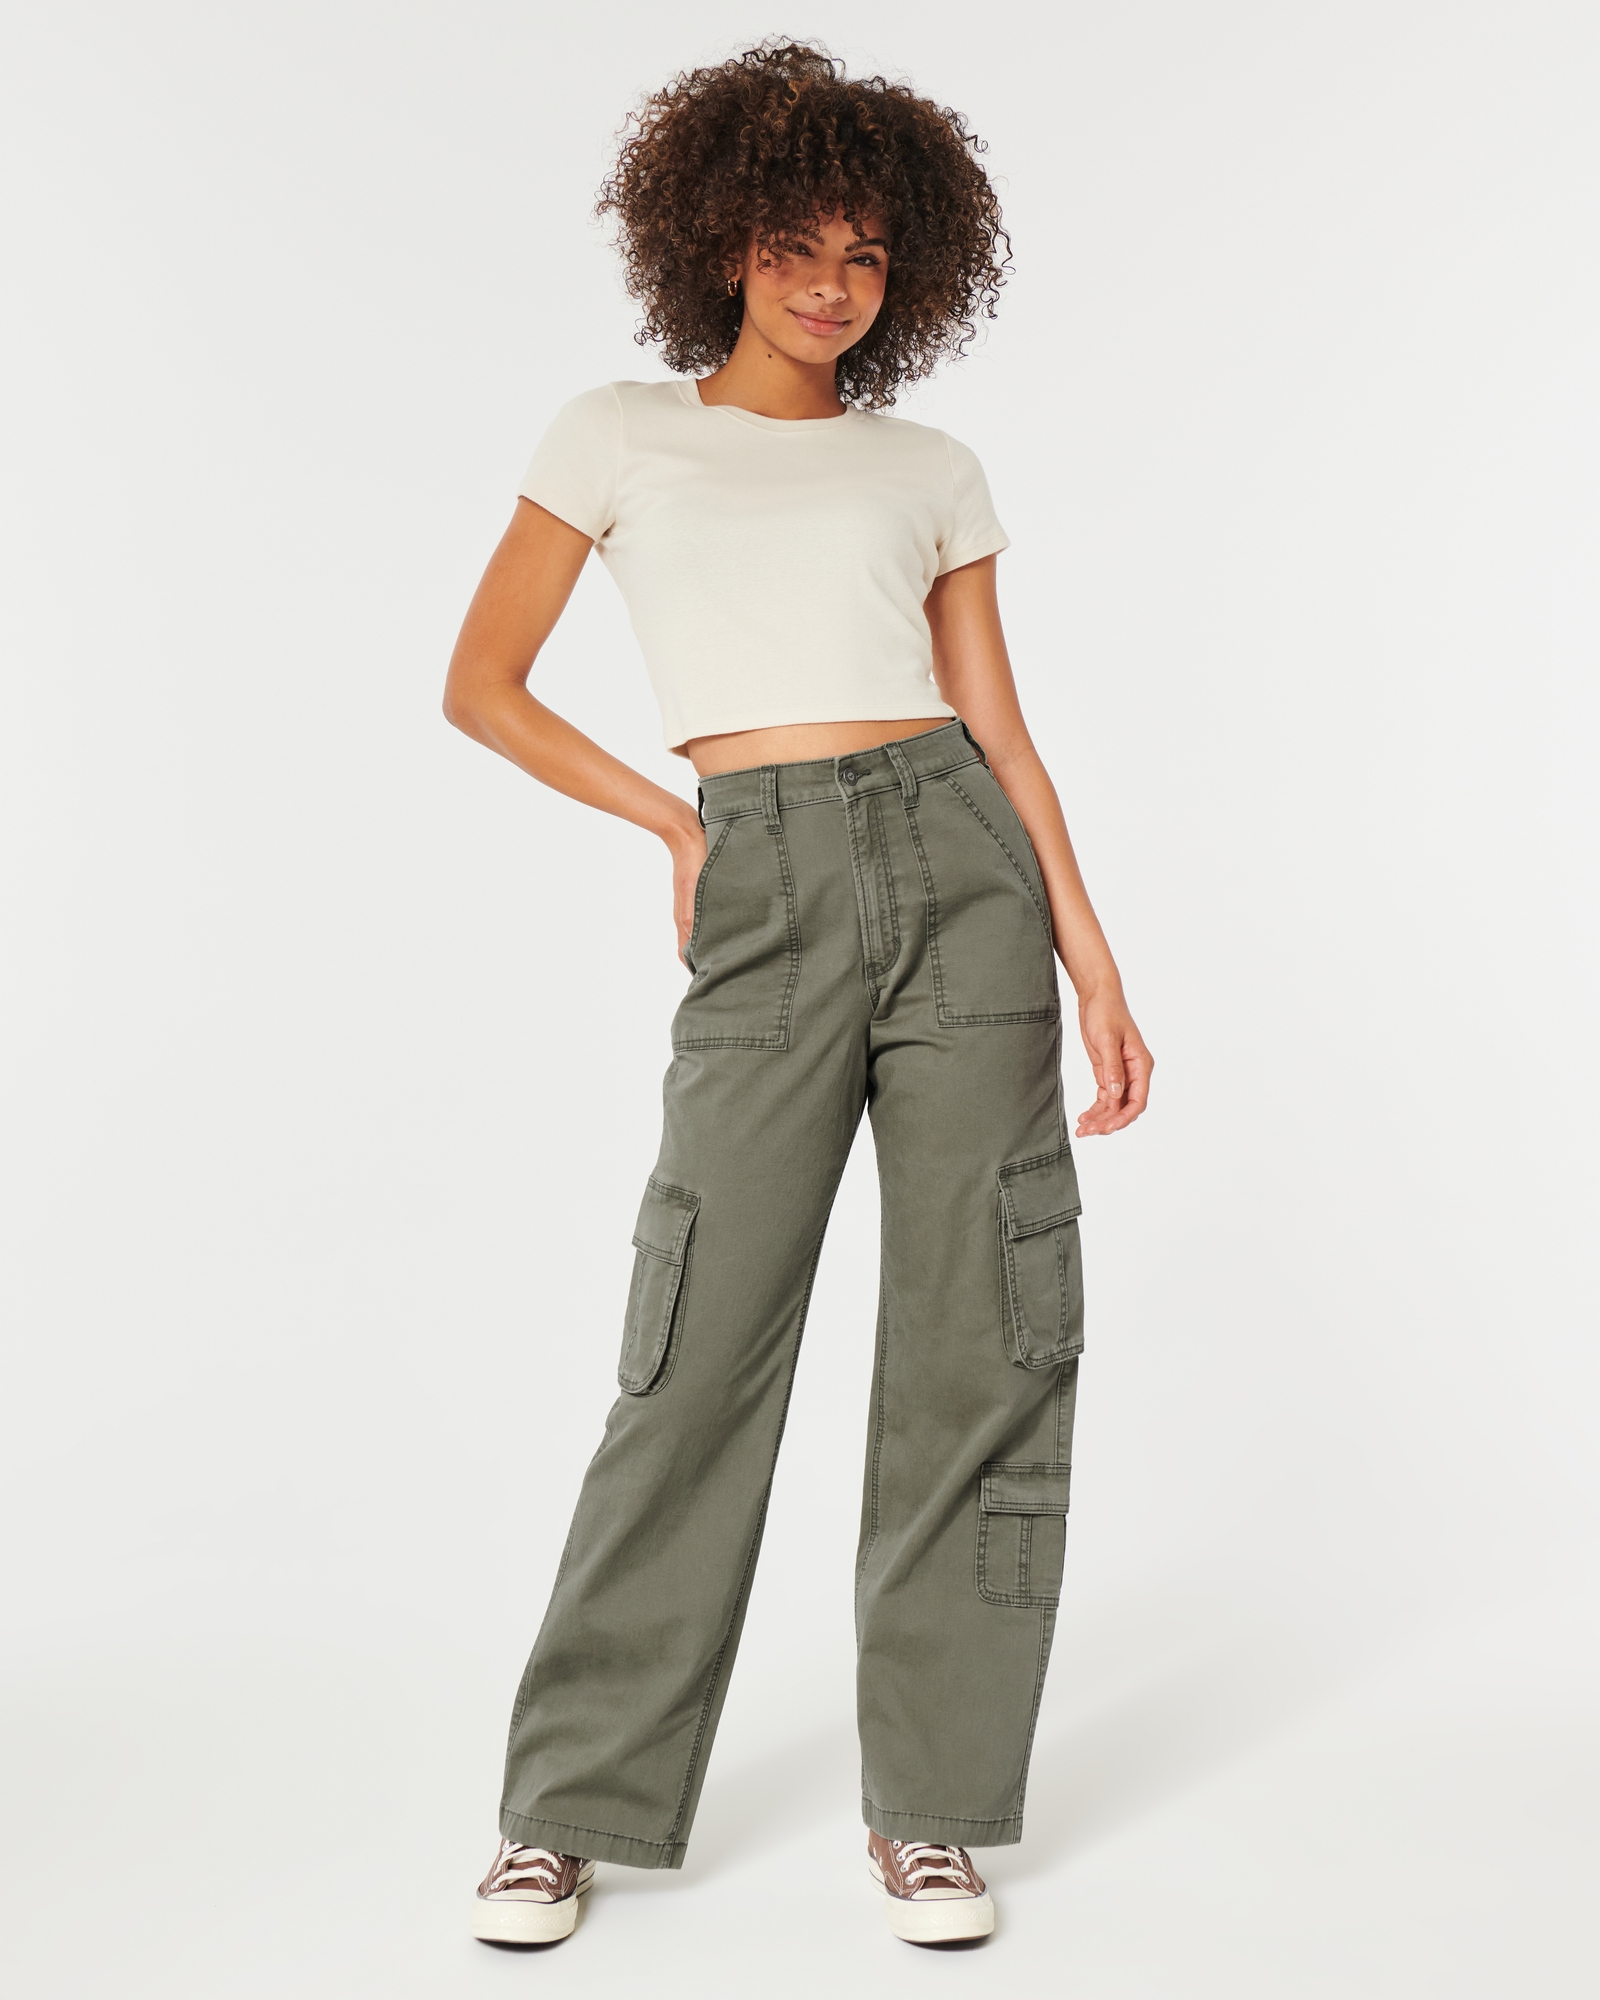 https://img.hollisterco.com/is/image/anf/KIC_356-3071-0358-330_model1.jpg?policy=product-extra-large